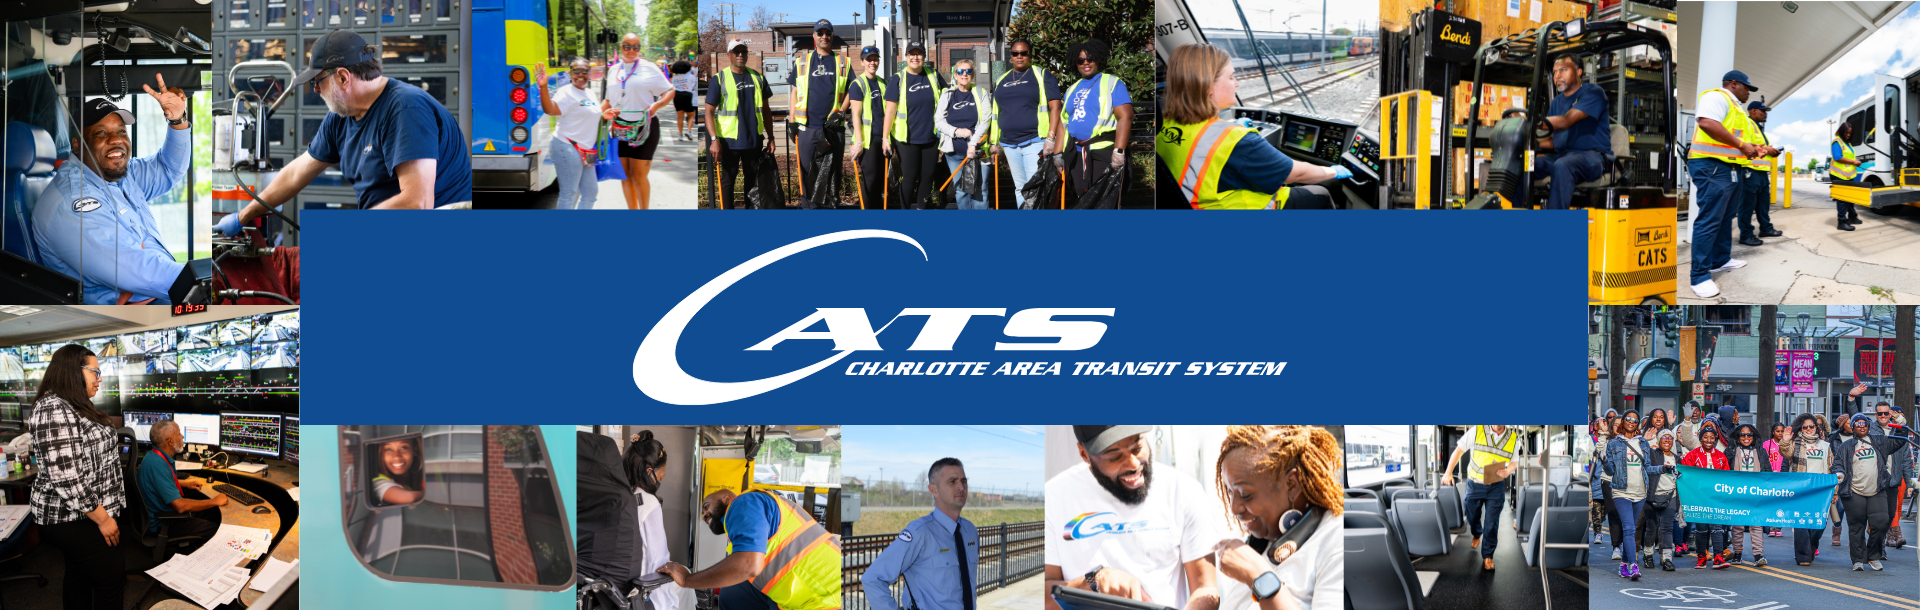 Photo collage of CATS employees working and smiling. In the center, the CATS logo in front of a blue background